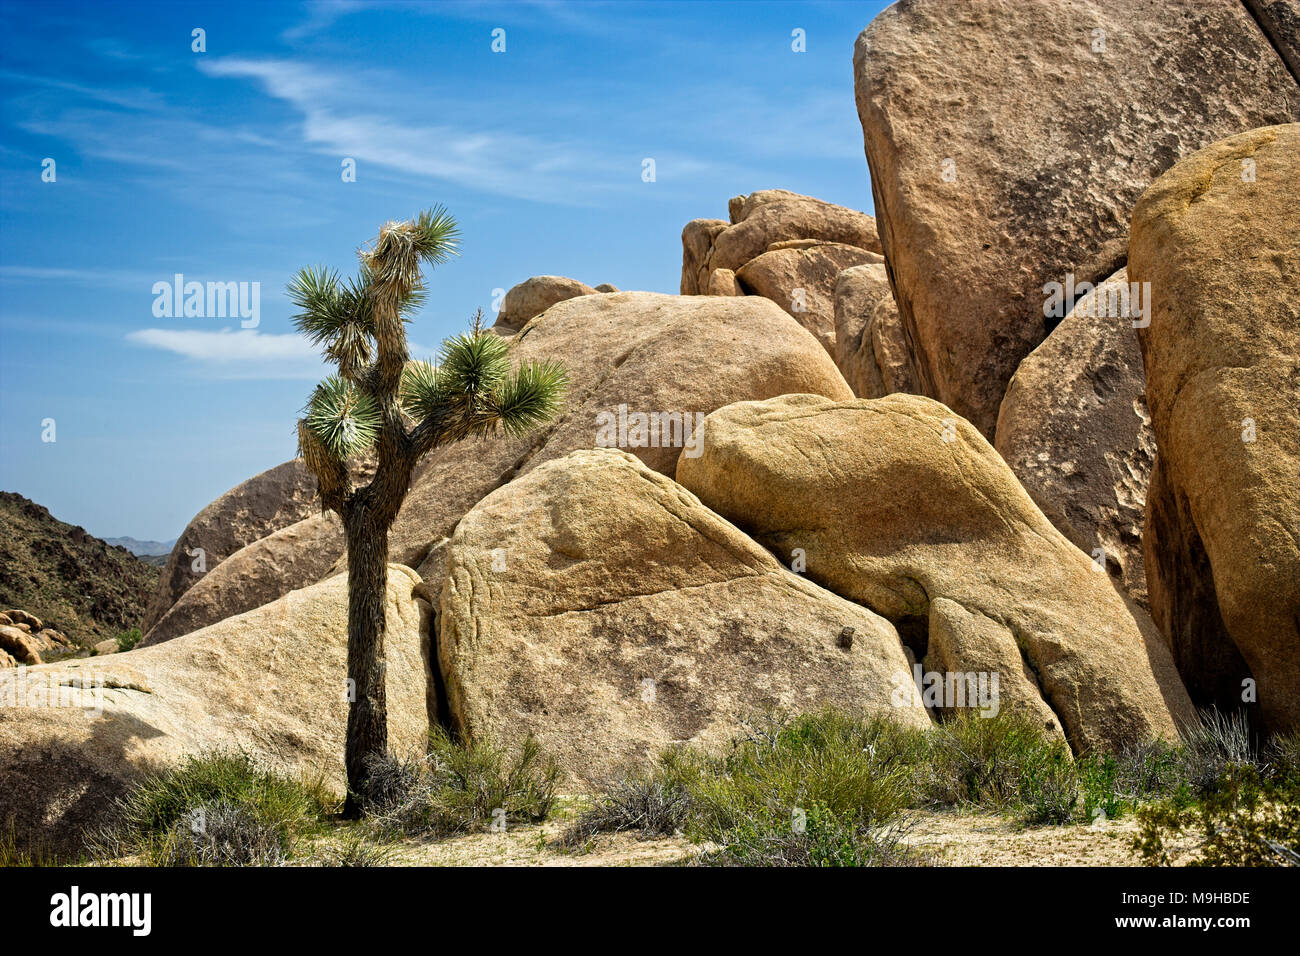 Single Joshua tree is dwarfed by the monzogranite rock formations in Joshua tree national Park in Southern California’s Mojave Desert Stock Photo